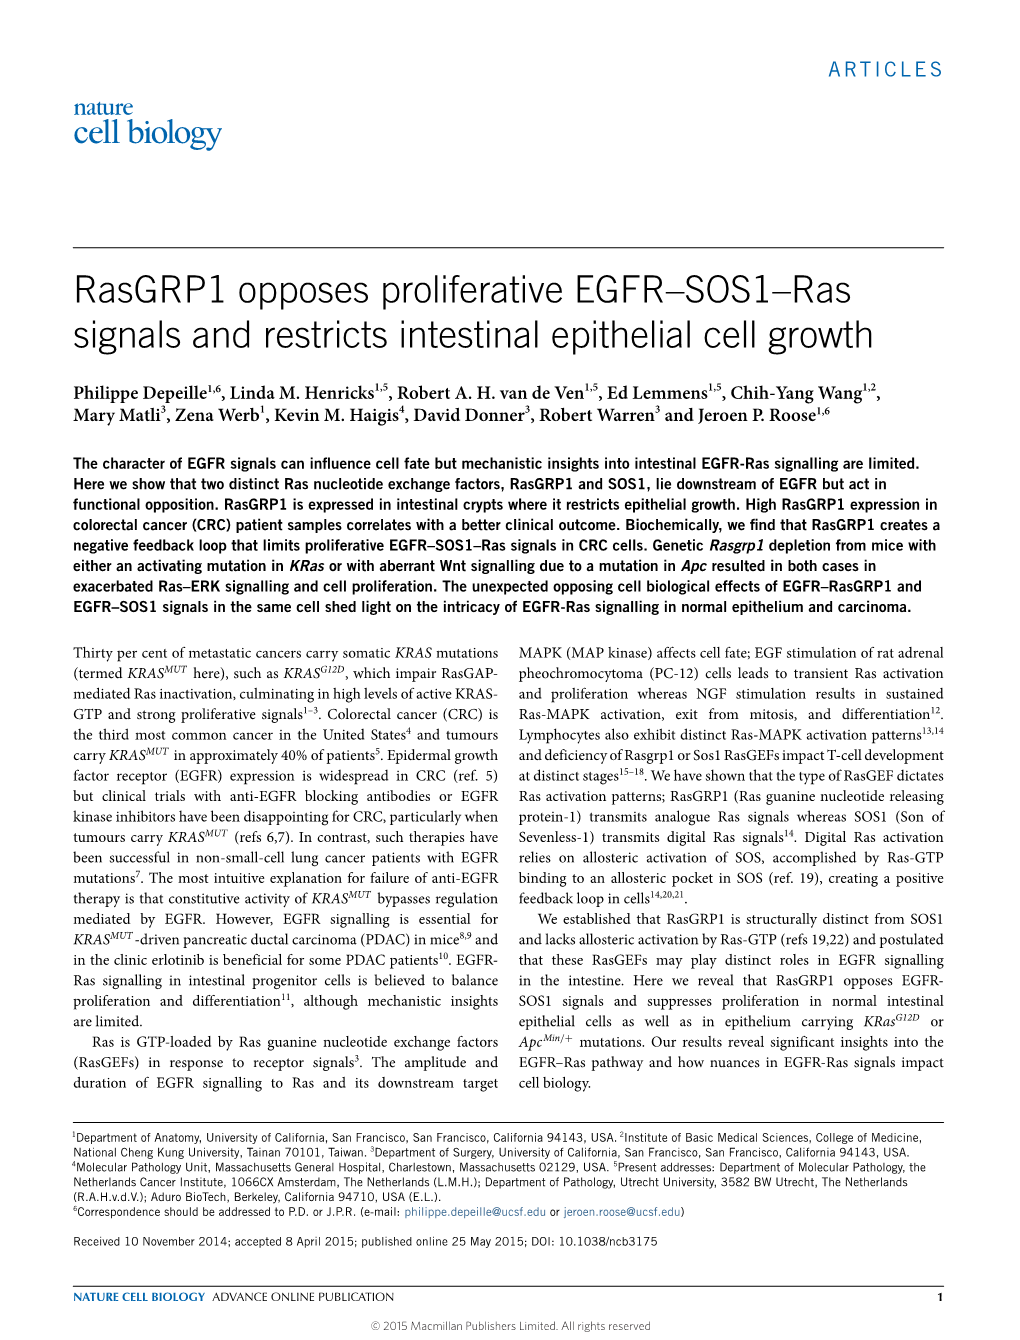 Rasgrp1 Opposes Proliferative EGFR–SOS1–Ras Signals and Restricts Intestinal Epithelial Cell Growth